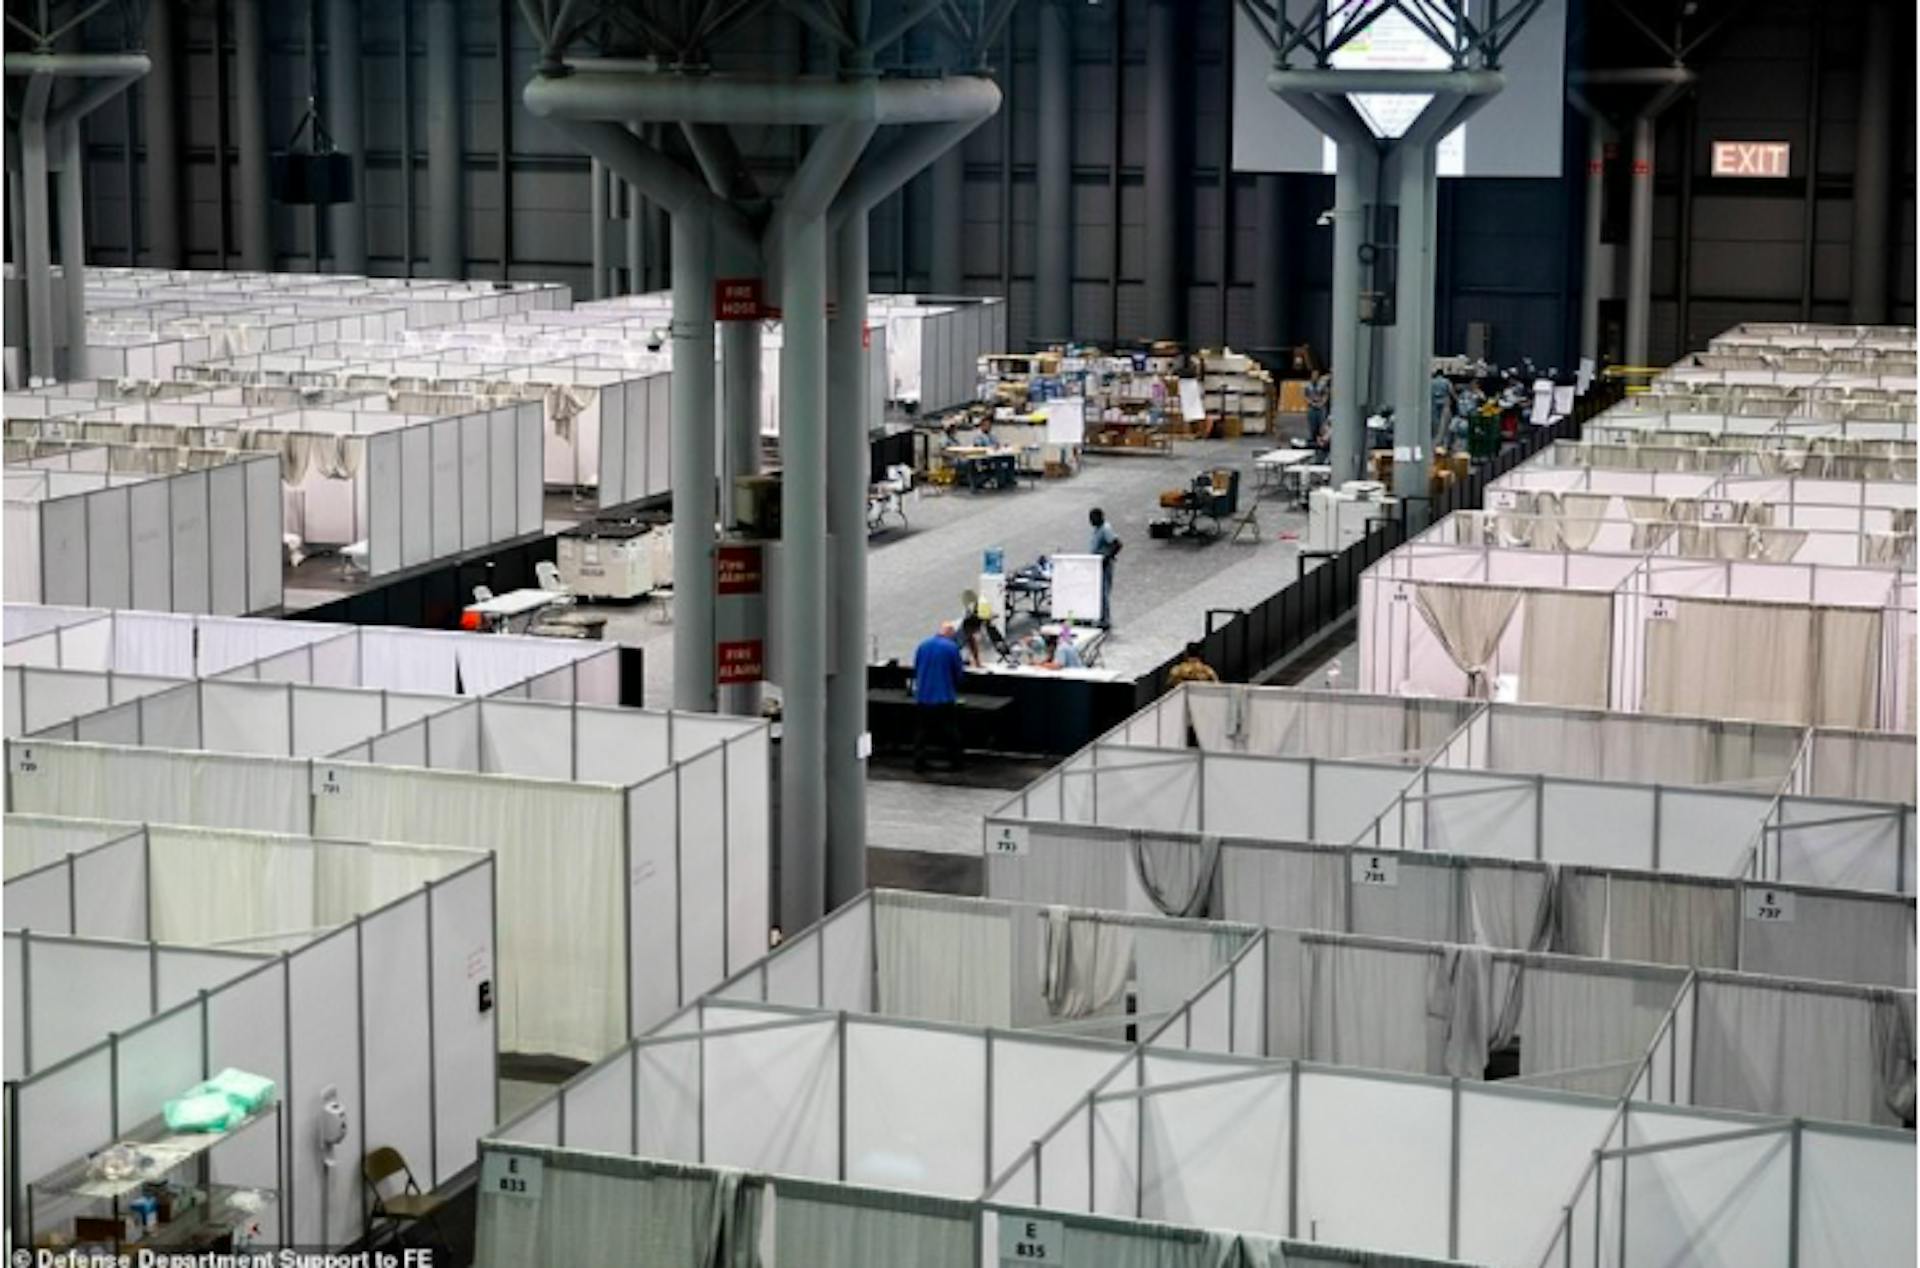 NYC’s Javits Center has been converted from a convention center into a field hospital